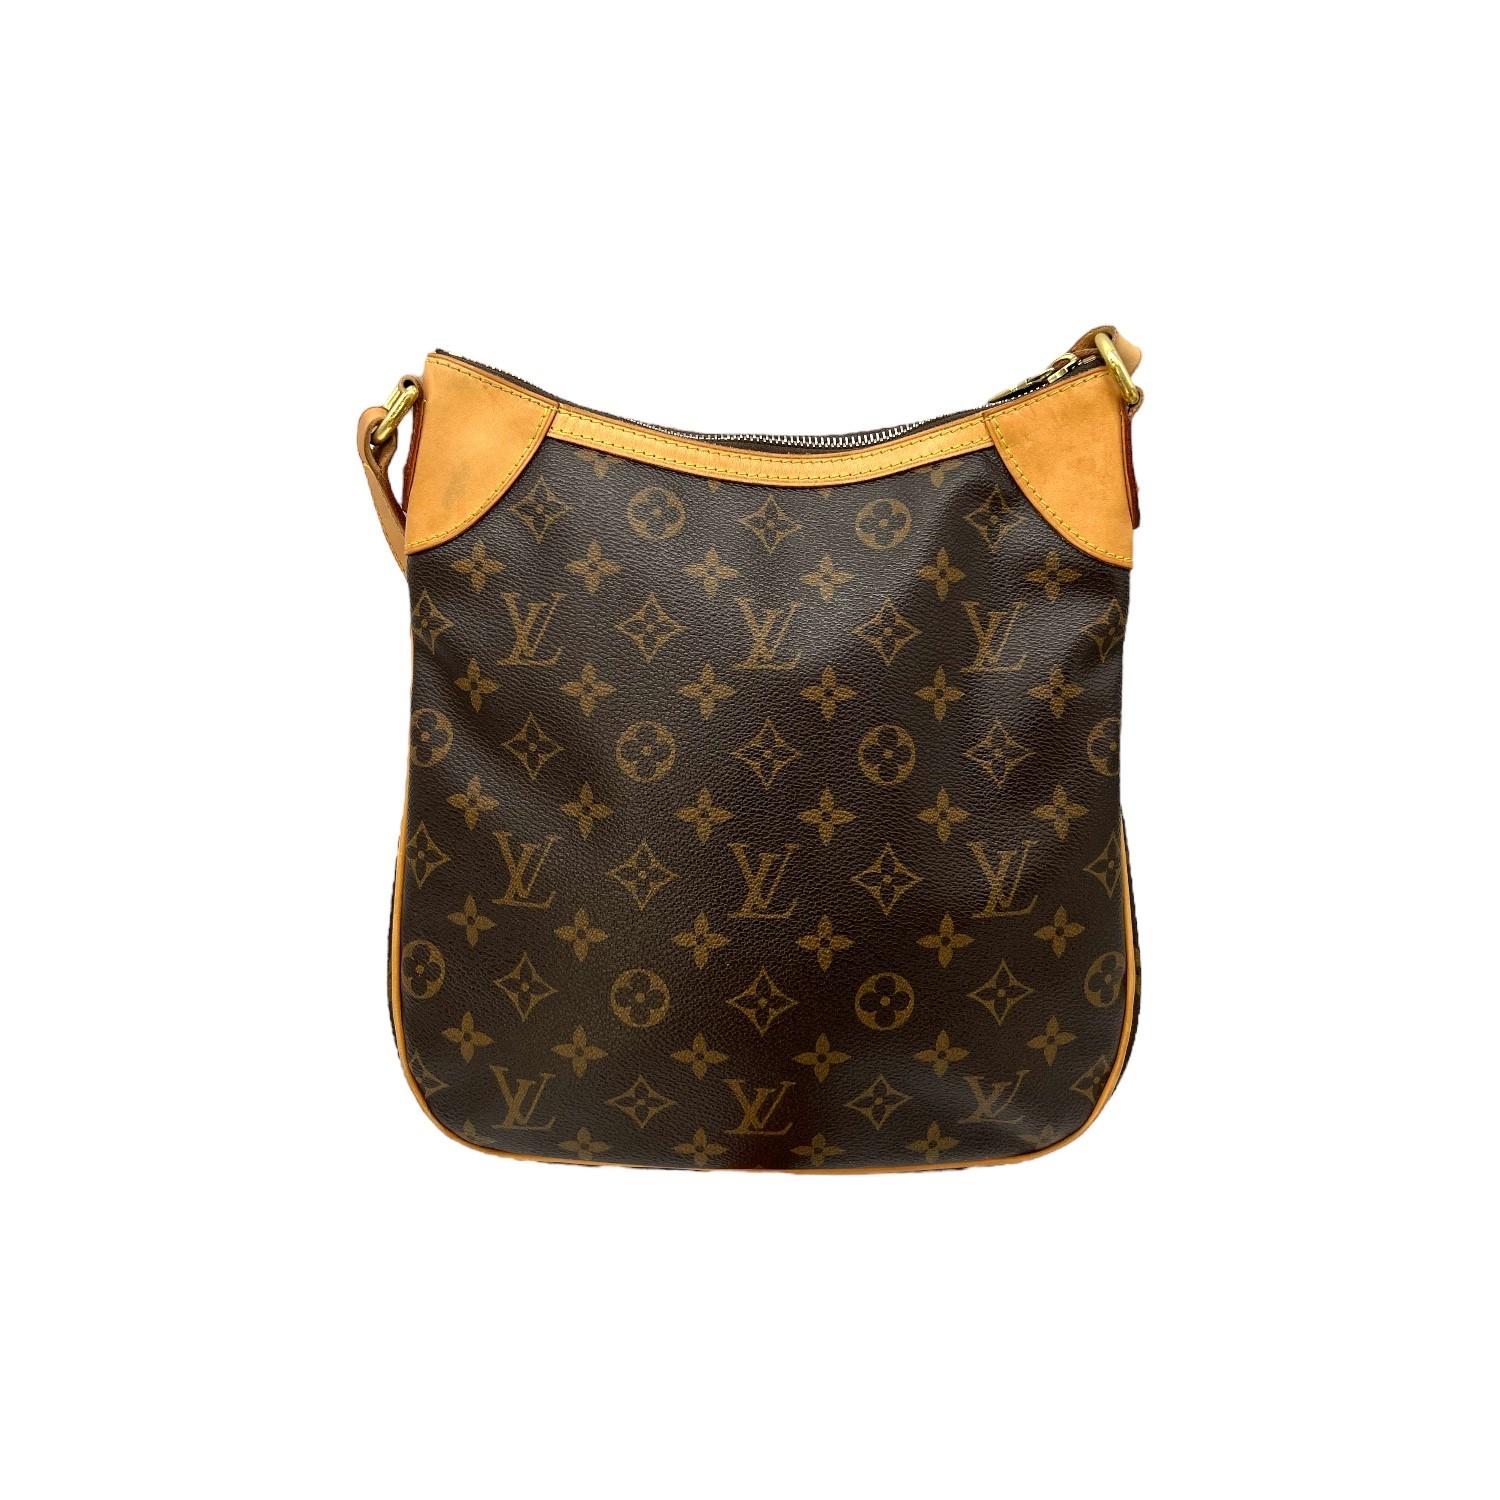 This Louis Vuitton Monogram Odeon PM was made in Spain in 2011 and it is finely crafted of the classic Louis Vuitton Monogram coated canvas with leather trimming and gold-tone hardware features. It has an adjustable flat leather shoulder strap. It